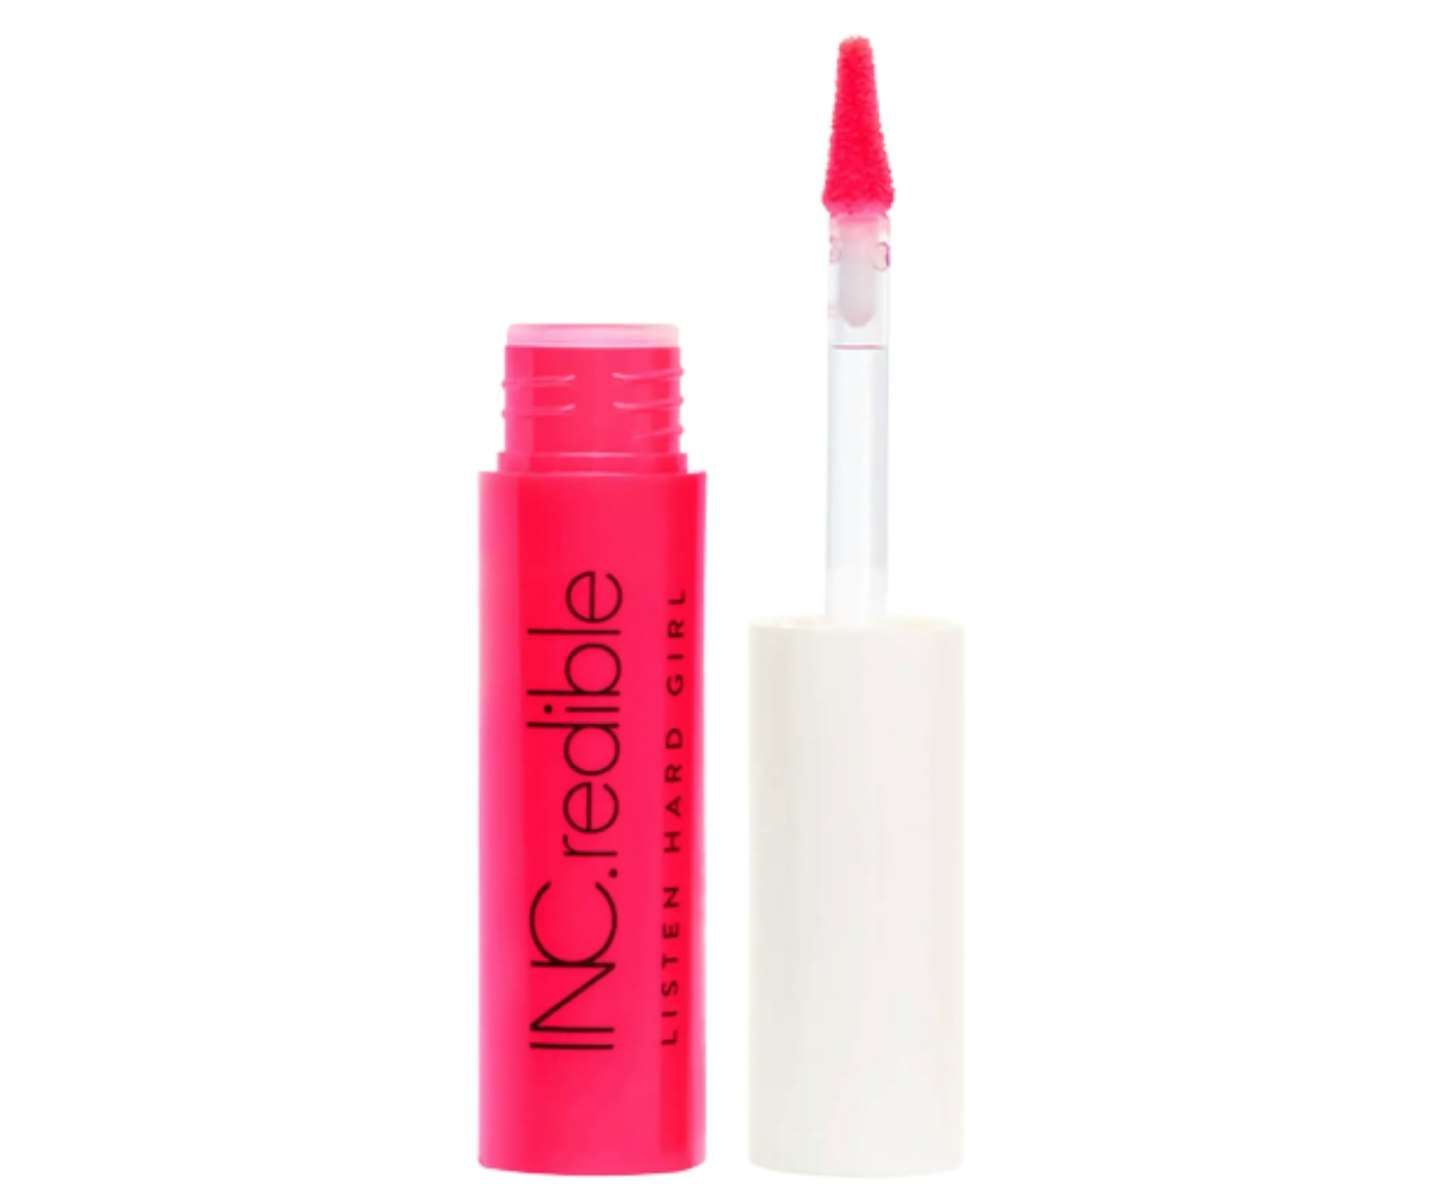 A picture of the Inc.redible Listen Hard Girl Neon Lip Paint in the shade She's Arrived.